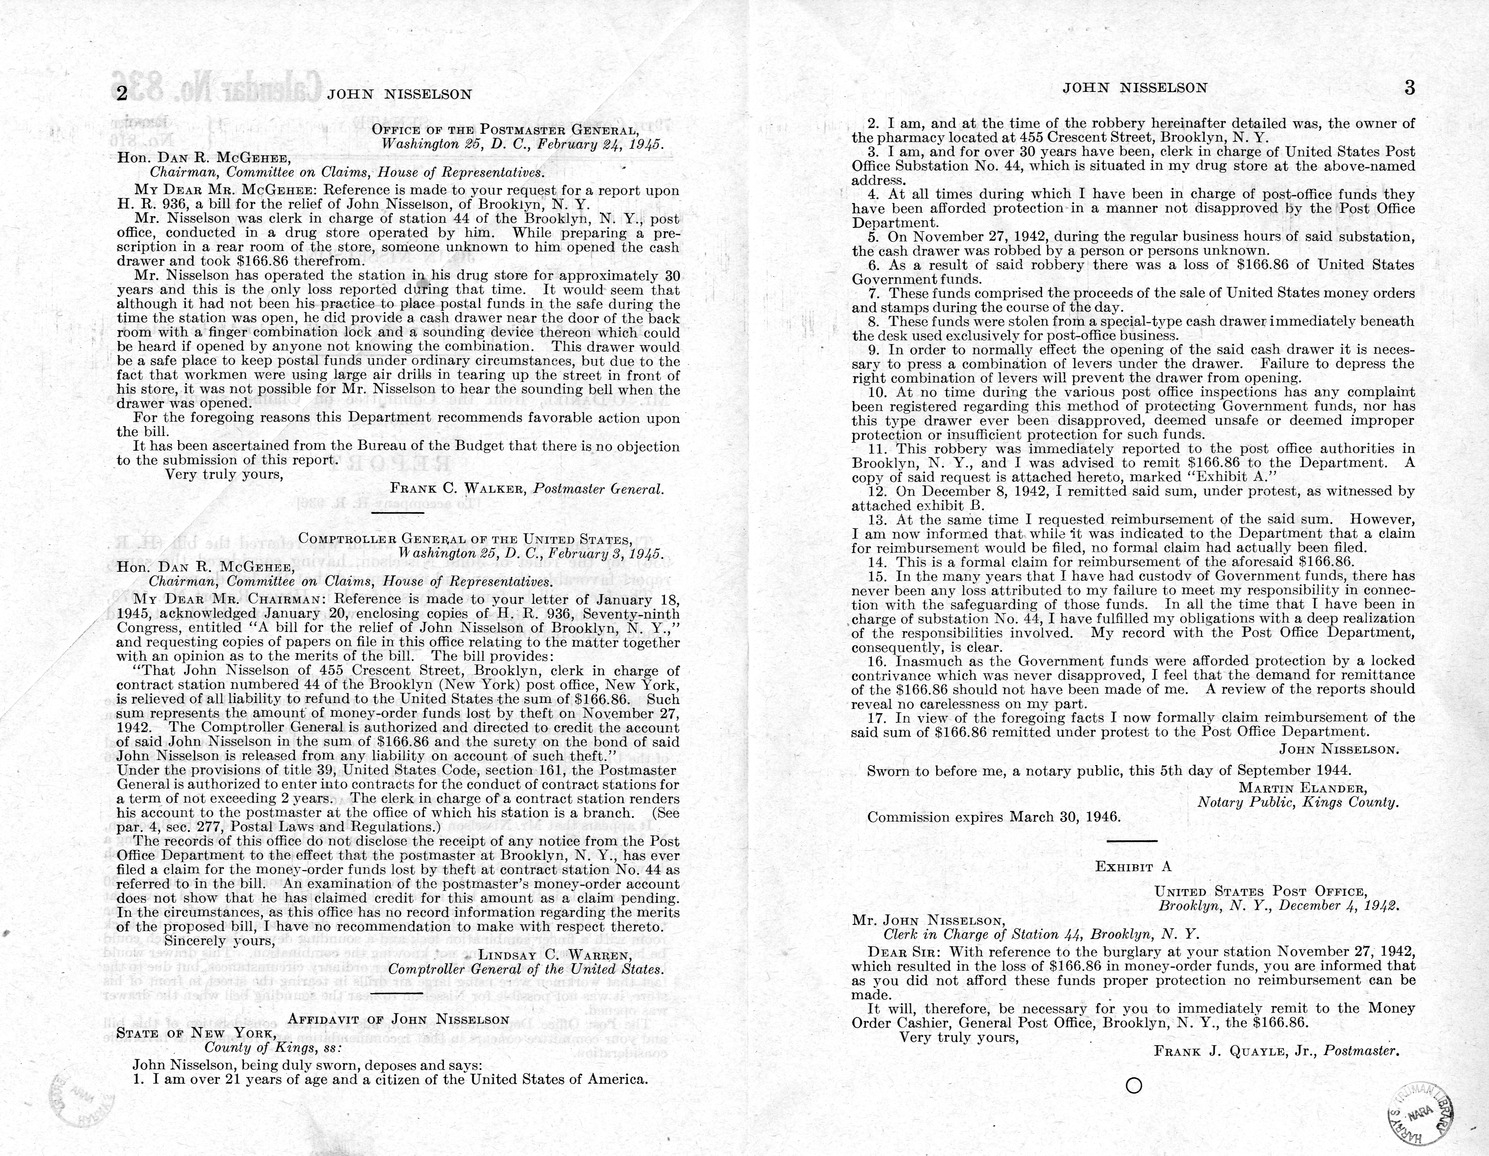 Memorandum from Frederick J. Bailey to M. C. Latta, H.R. 936, For the Relief of John Nisselson, of Brooklyn, New York, with Attachments